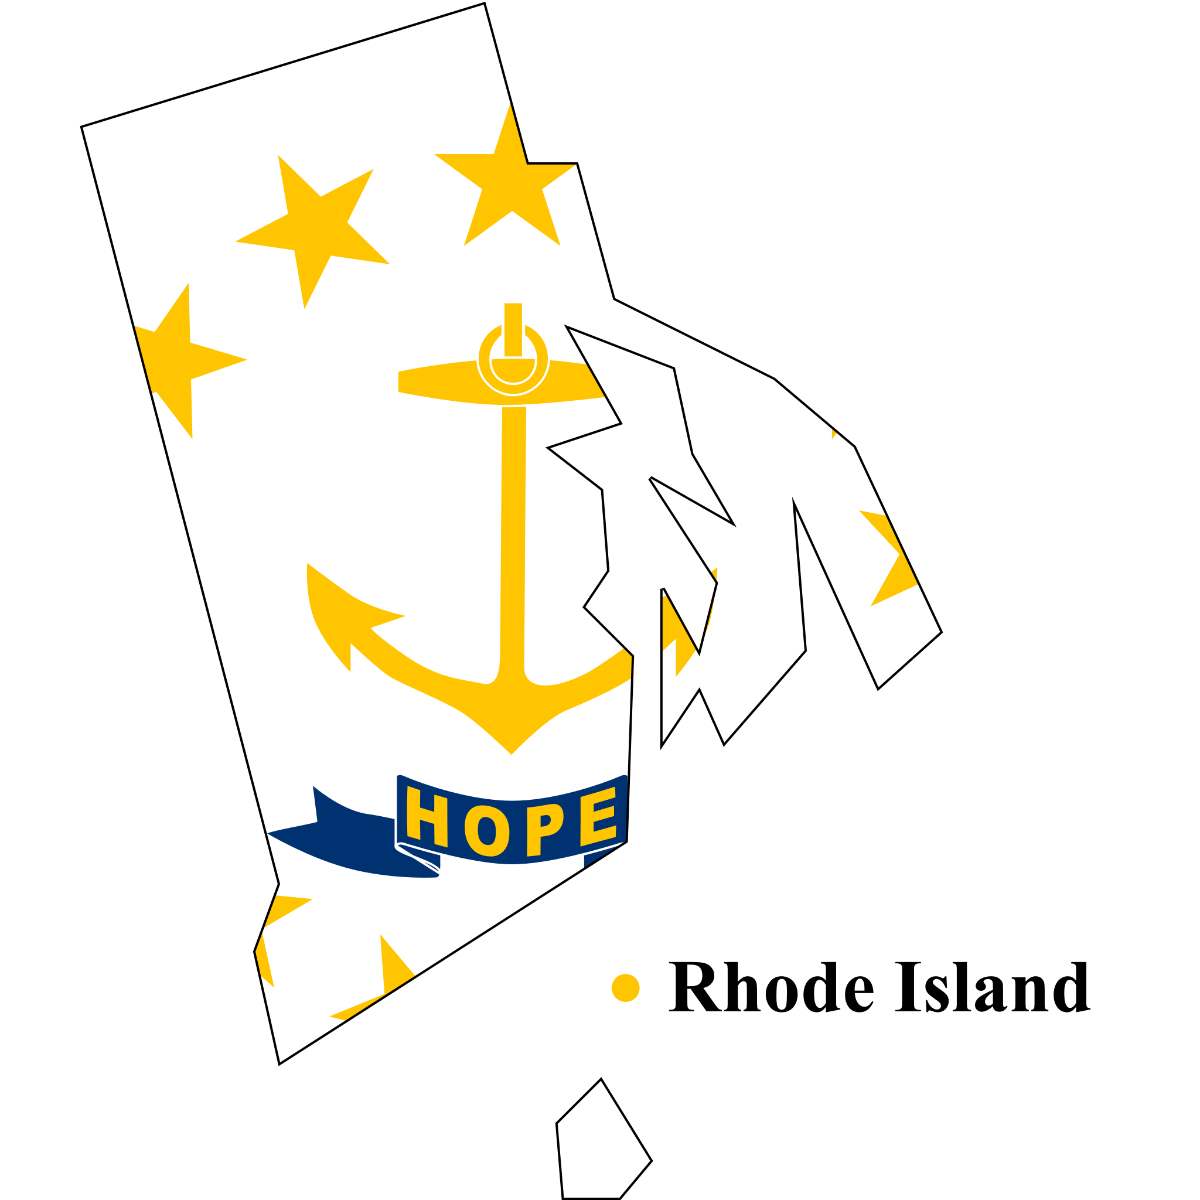 Rhode Island State map cutout with Rhode Island flag superimposed